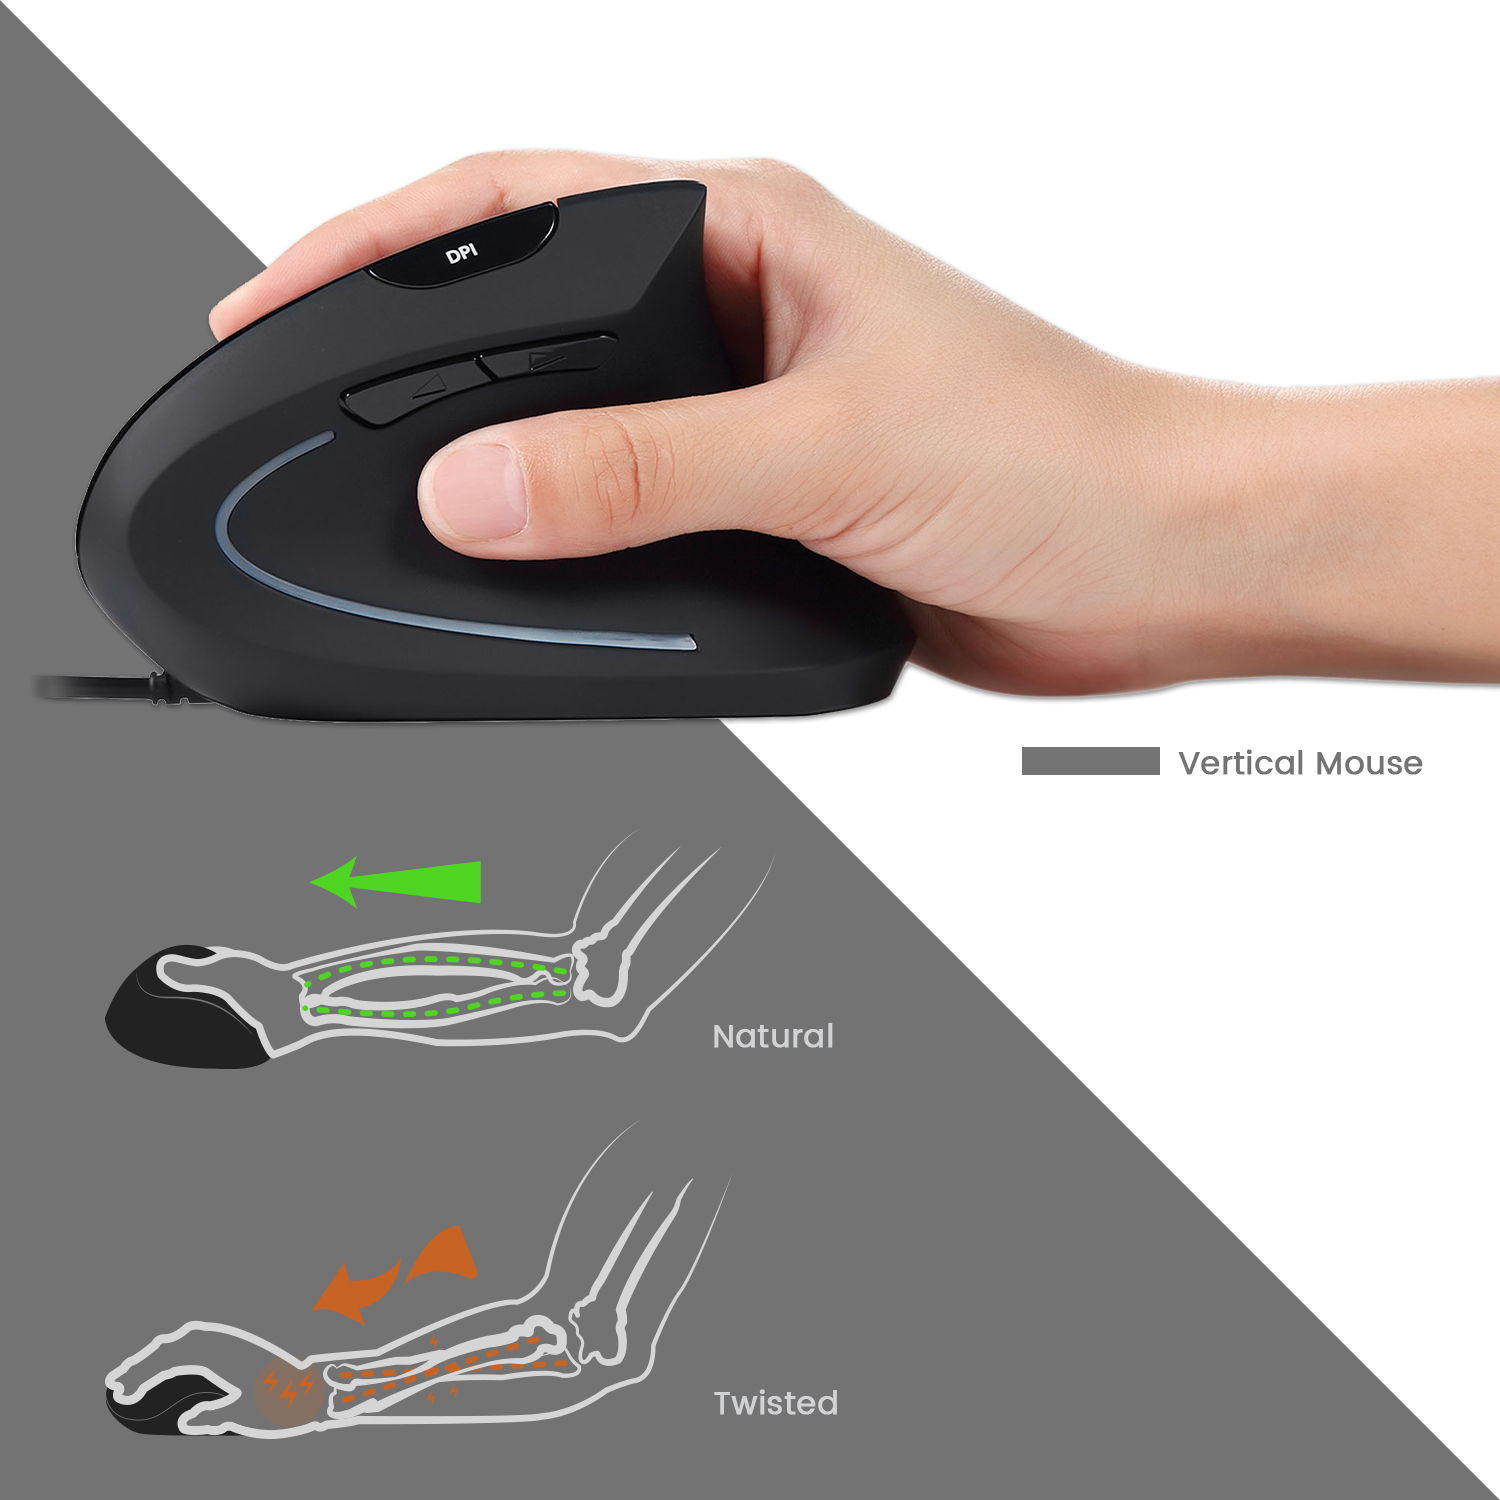 Vertical mouse with high-resolution optical sensor